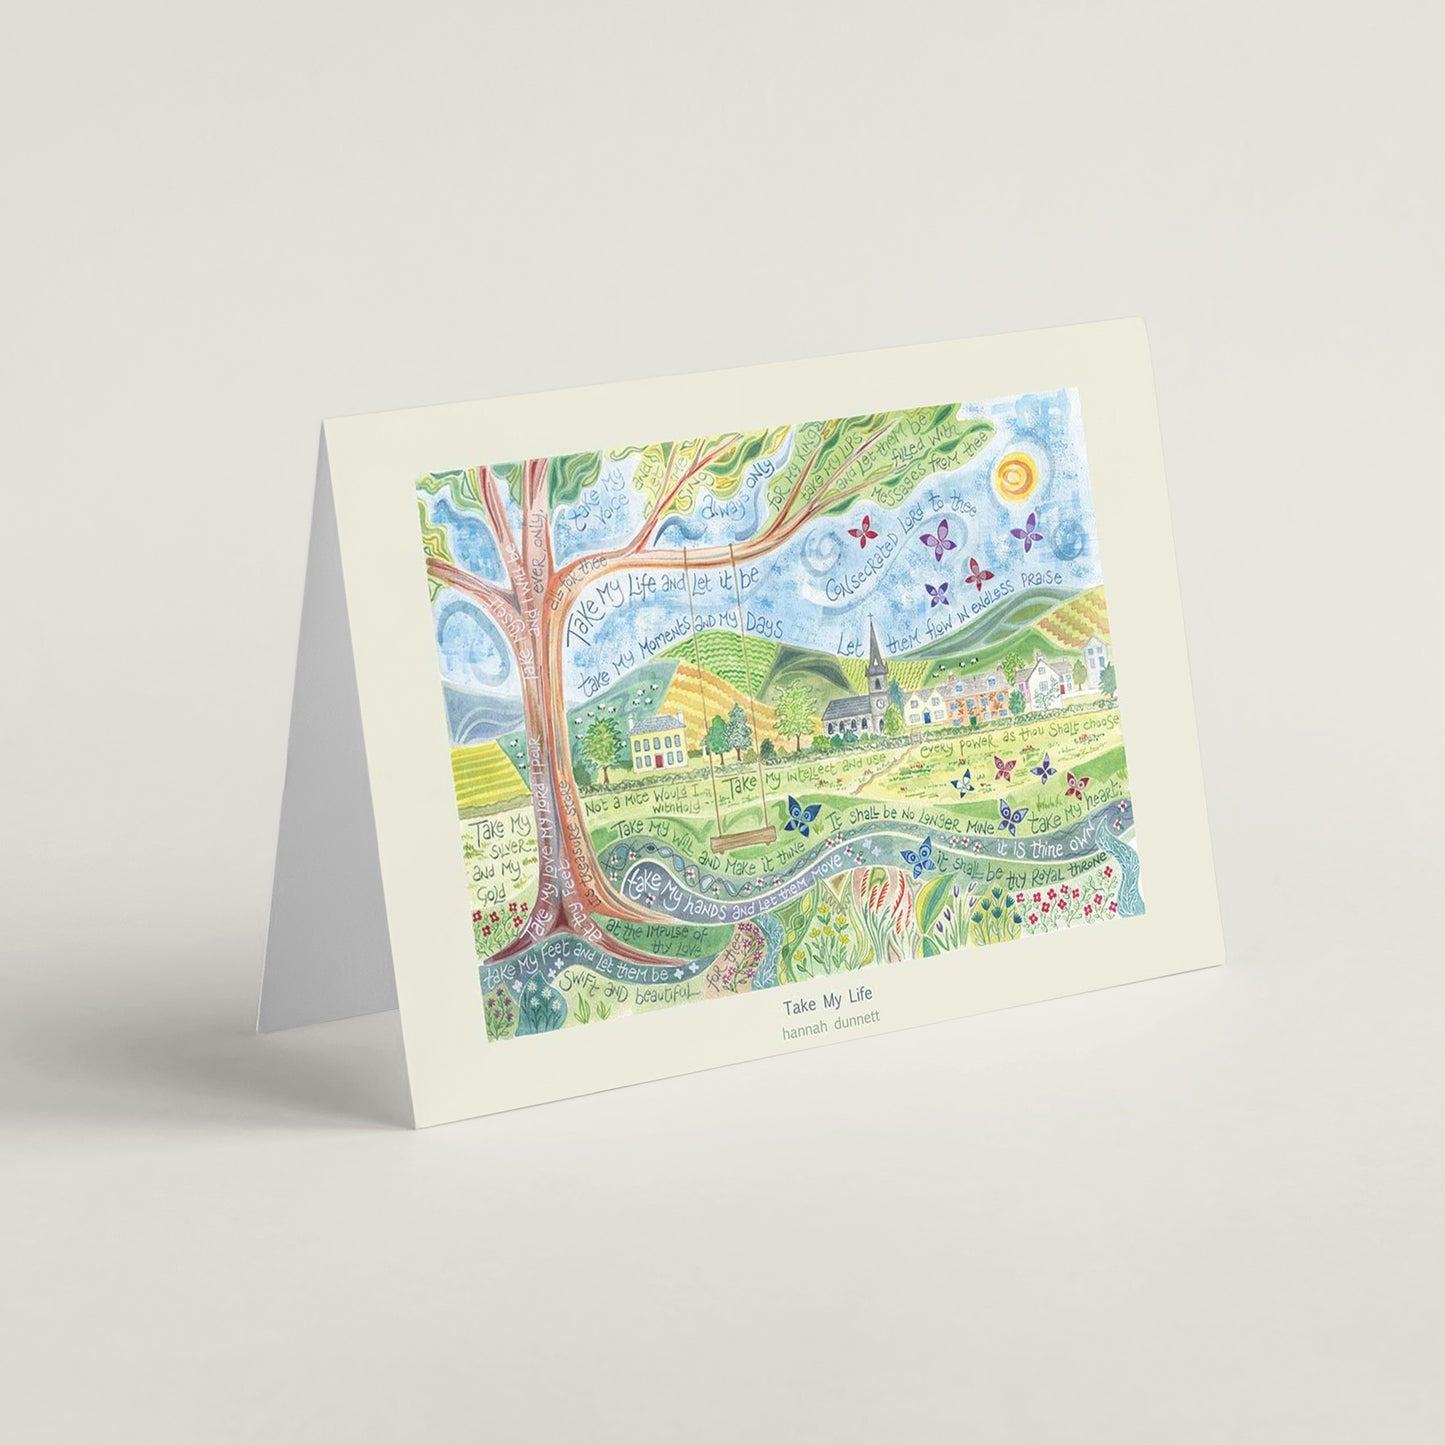 'Take my life' by Hannah Dunnett Greeting Card